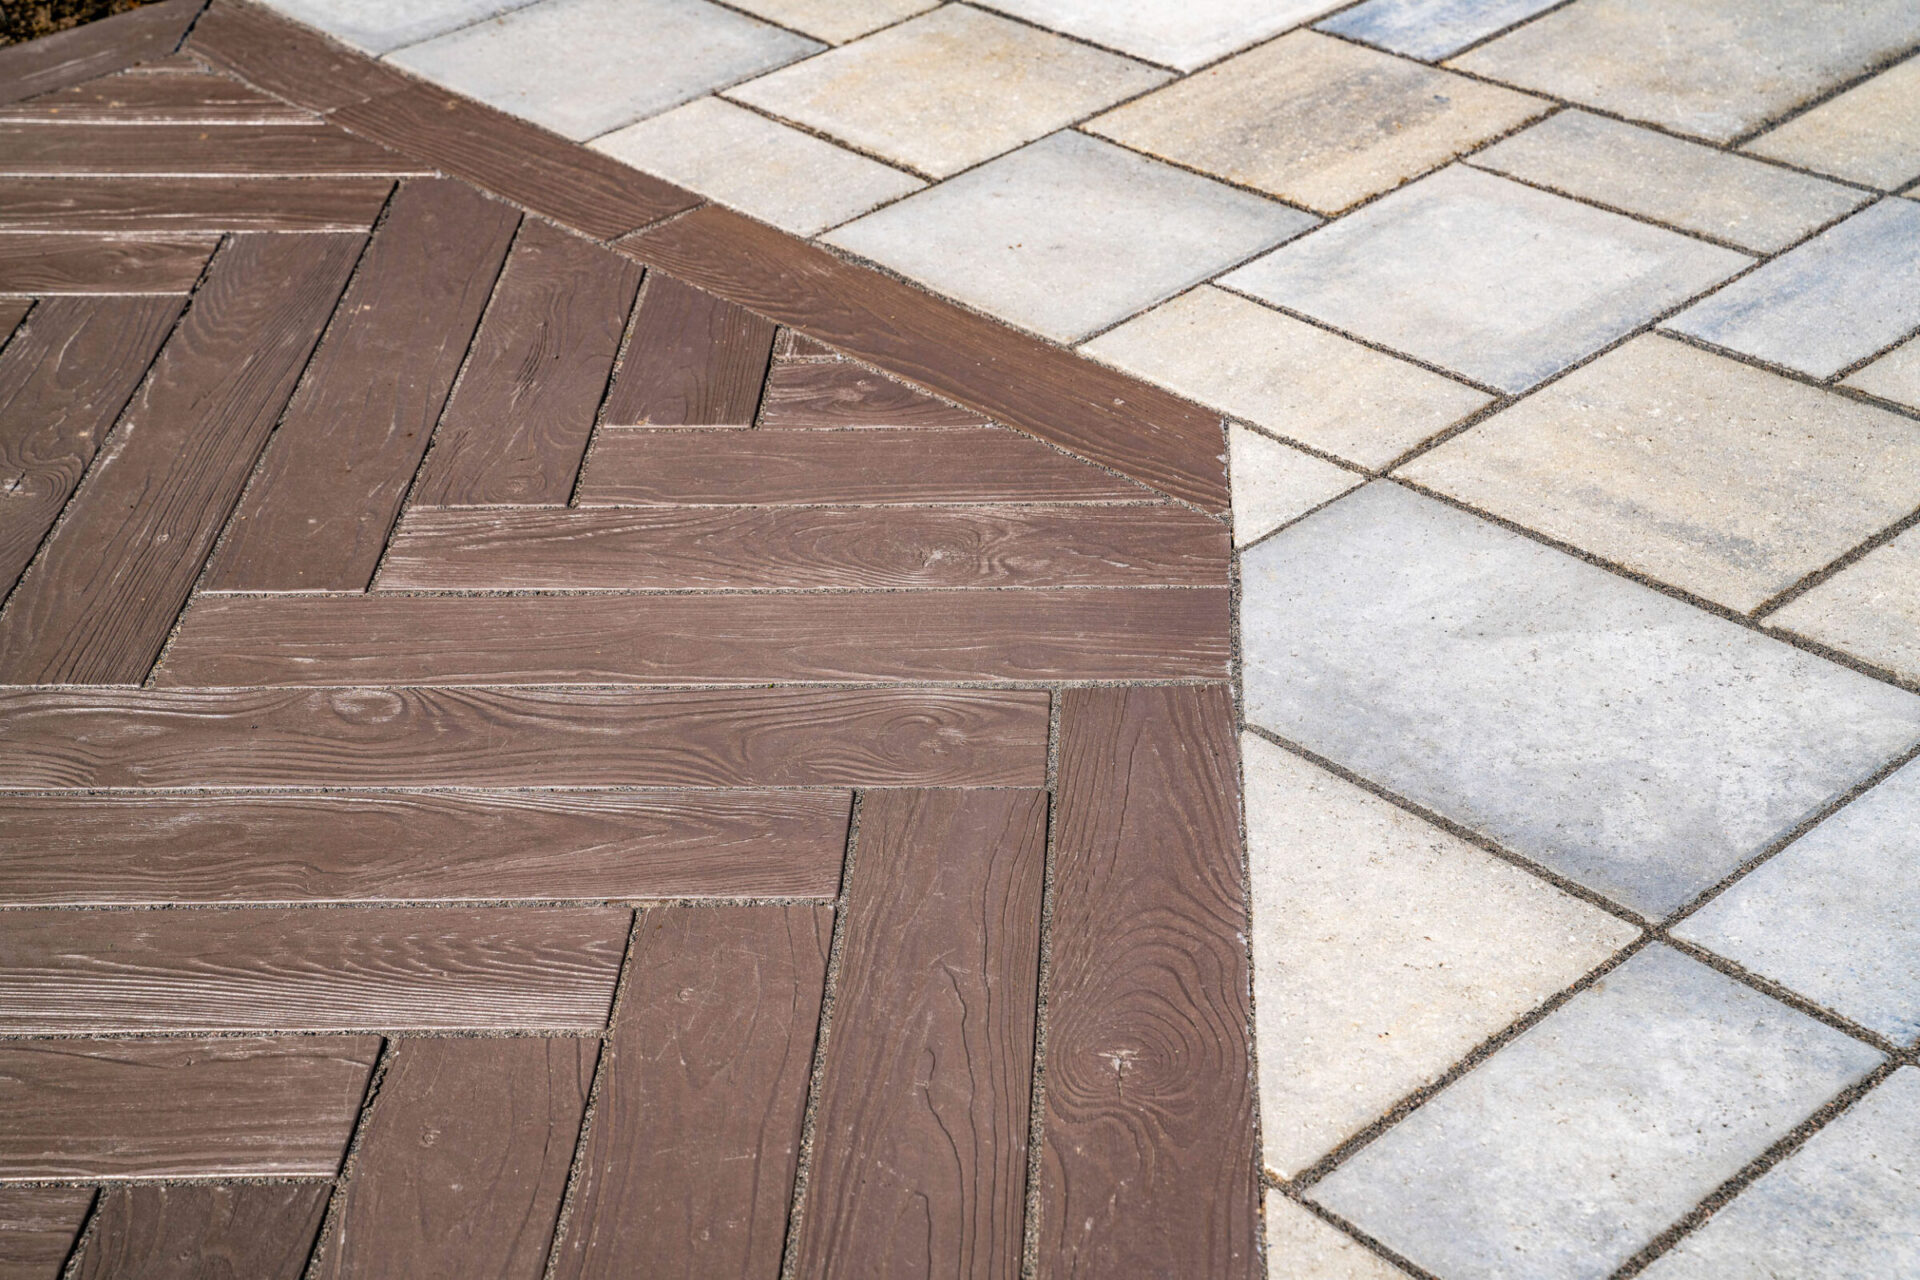 This image shows a section of outdoor flooring where wooden planks meet patterned stone tiles, creating a contrasting textural and color design.